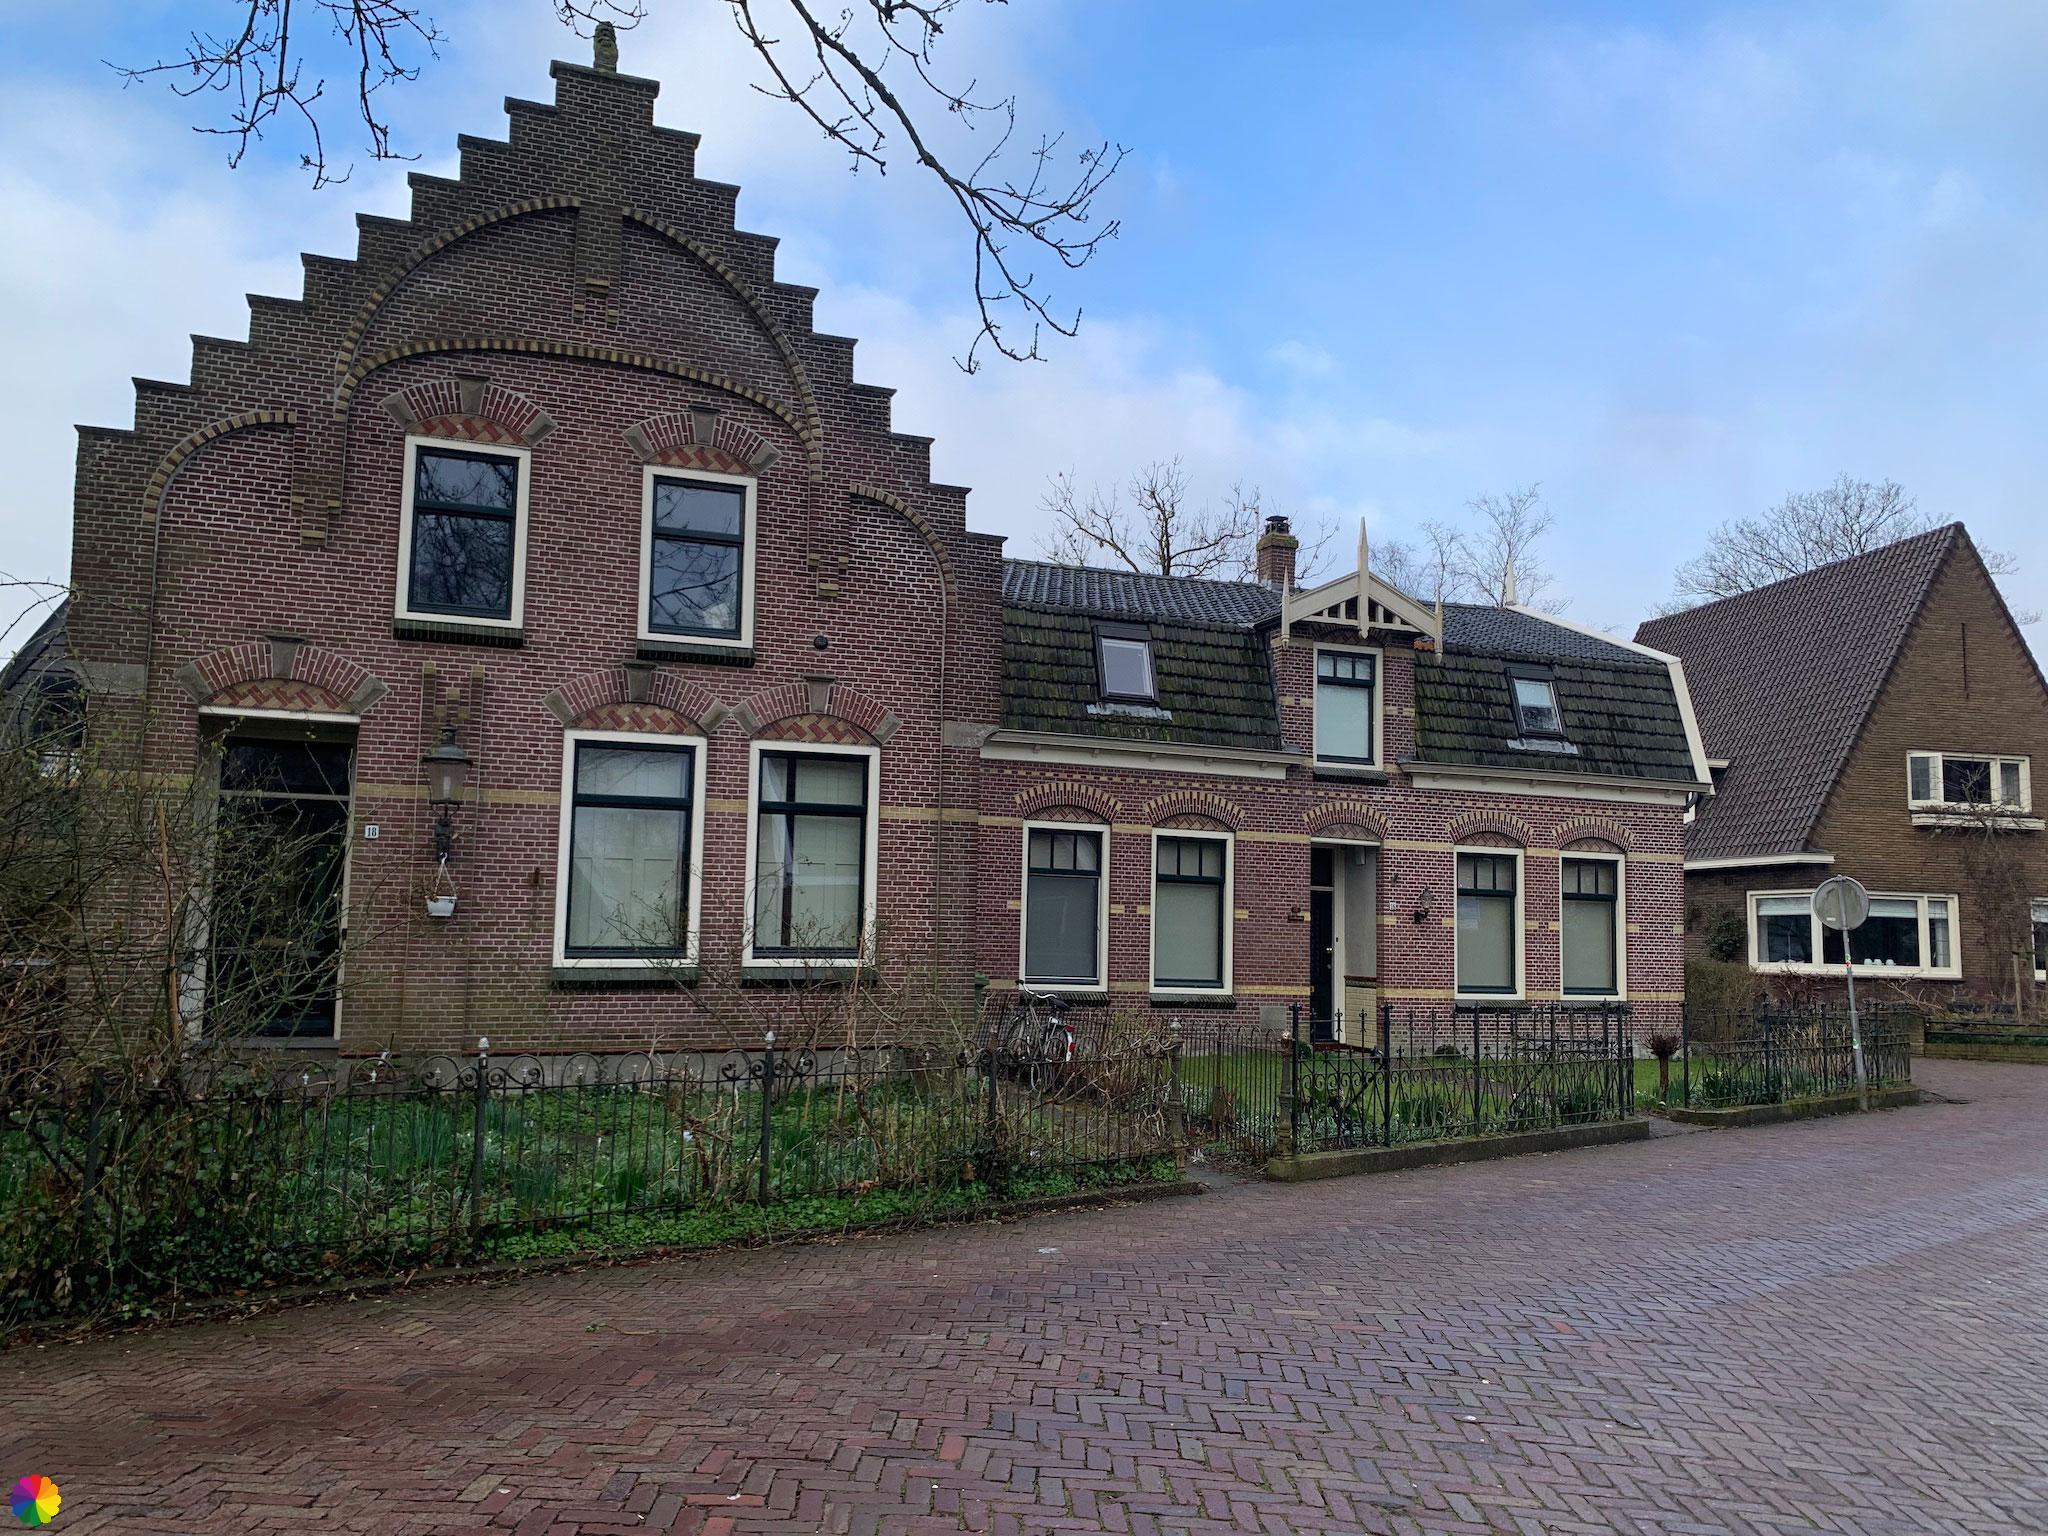 House with nice facade at Broek in Waterland